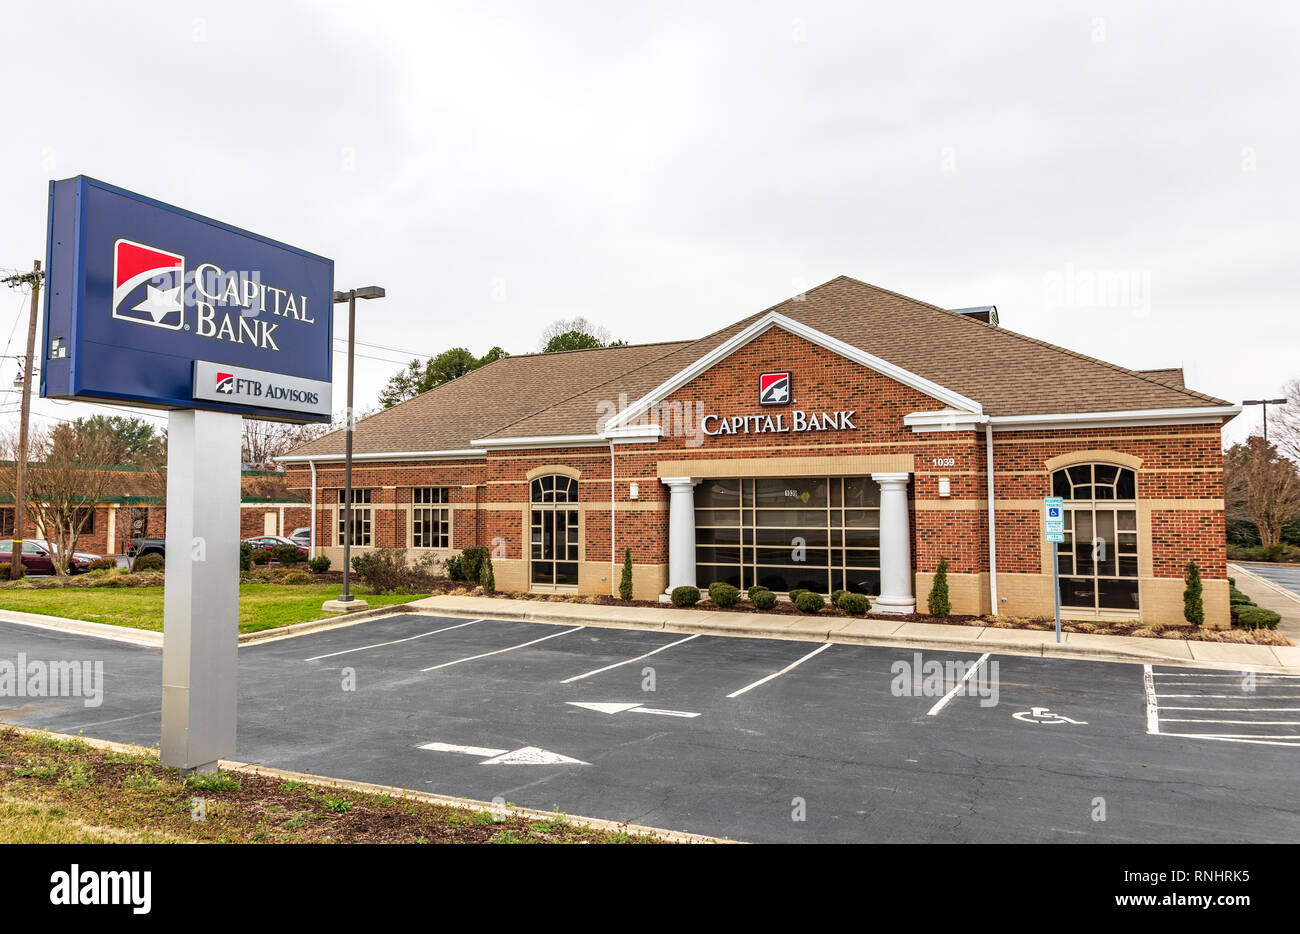 HICKORY, NC, USA-2/17/19: A branch of Capital Bank, FTB advisors, a wealth management group. Stock Photo